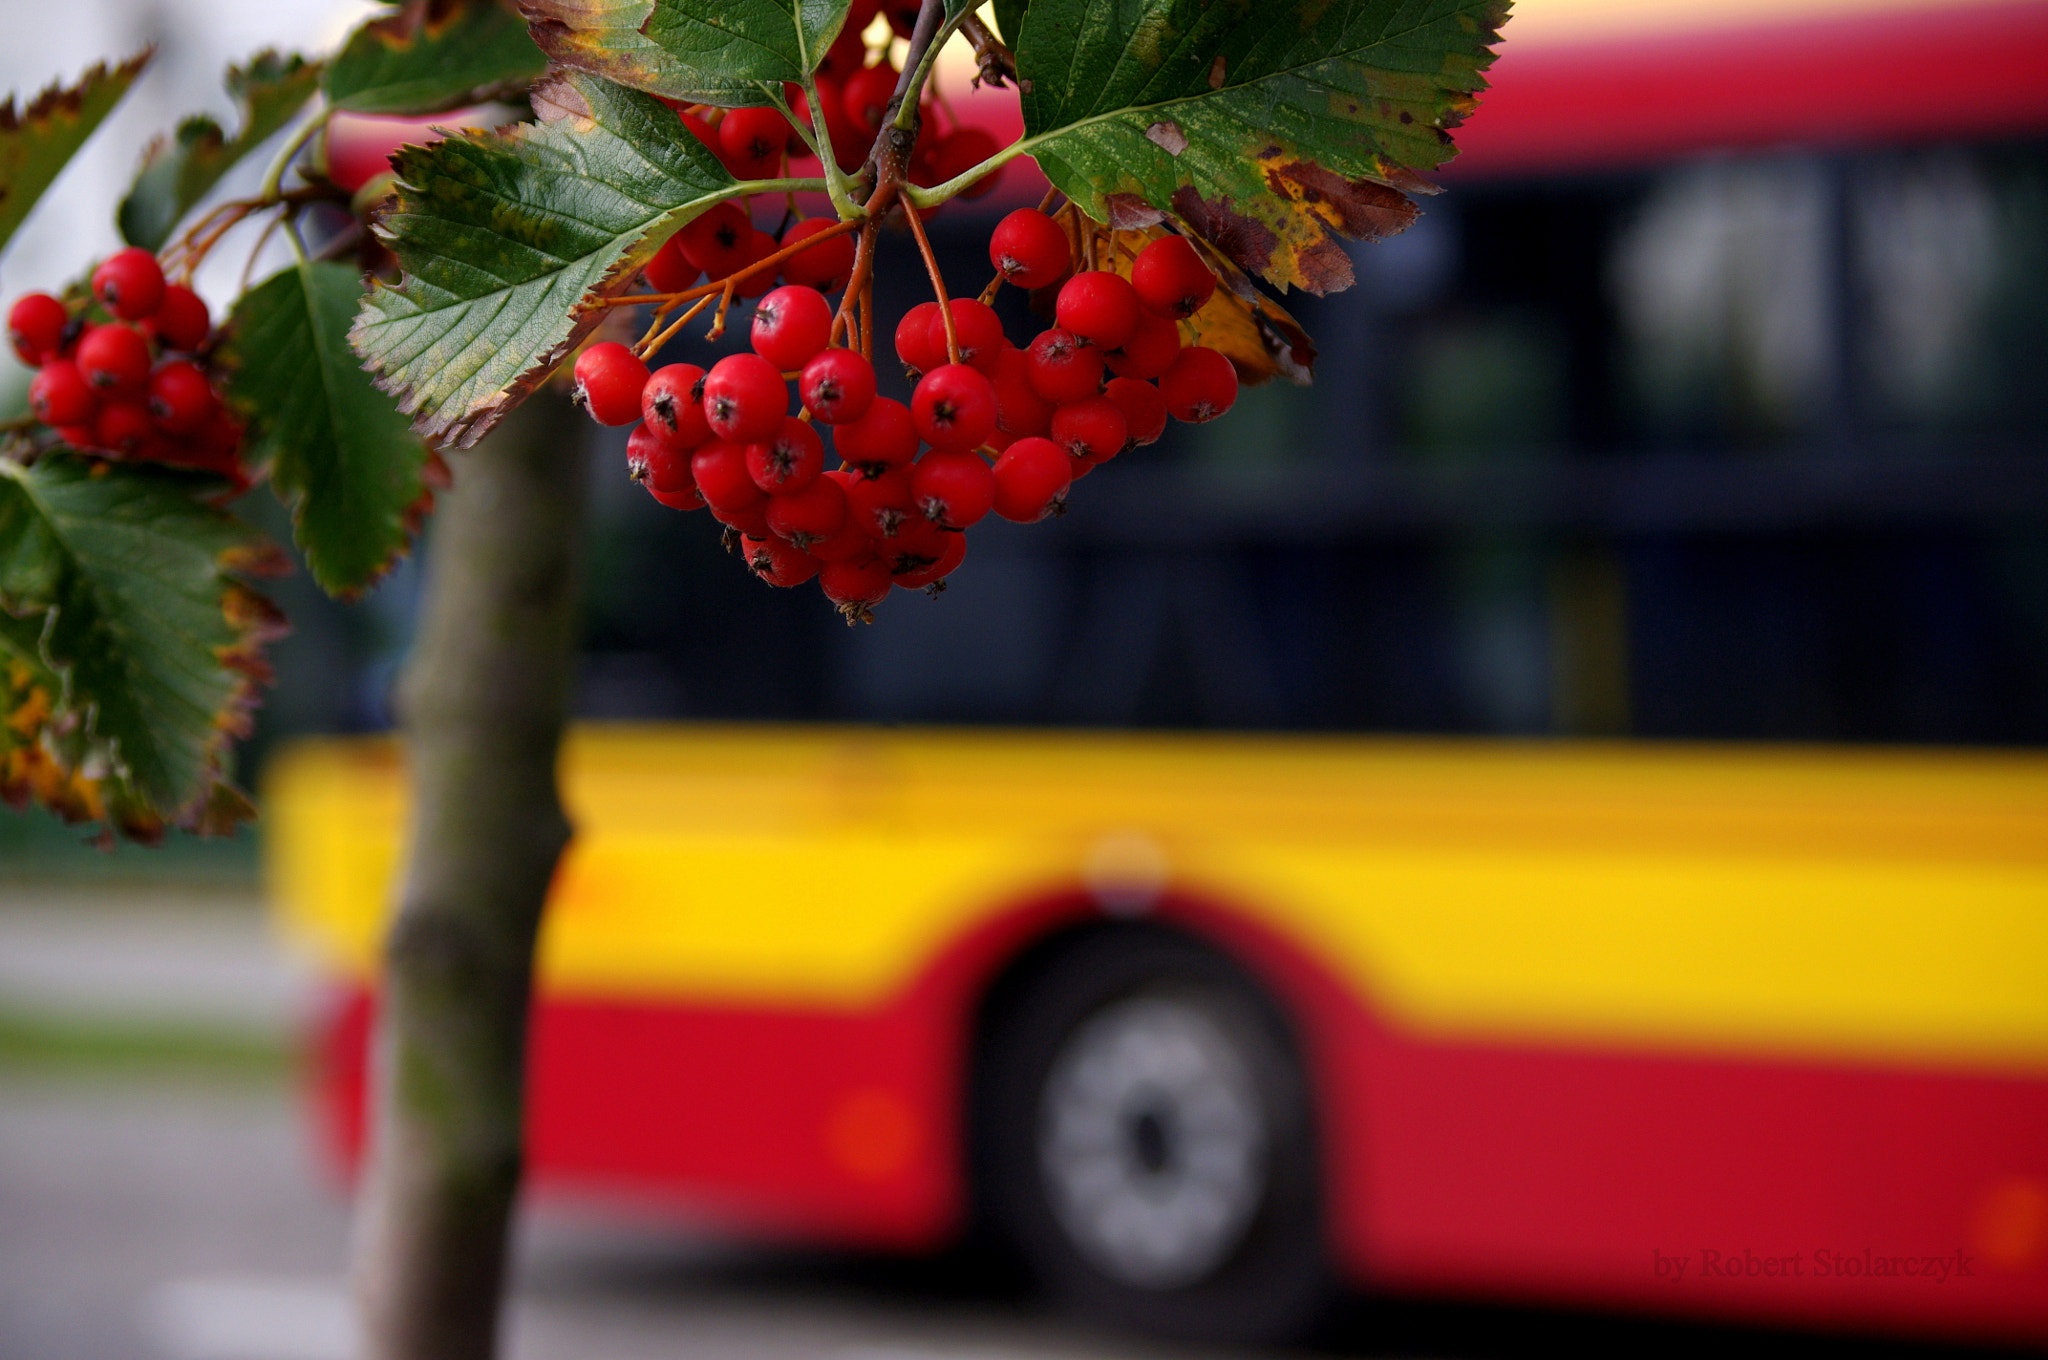 Pentax K-x sample photo. Autumn has arrived by bus photography